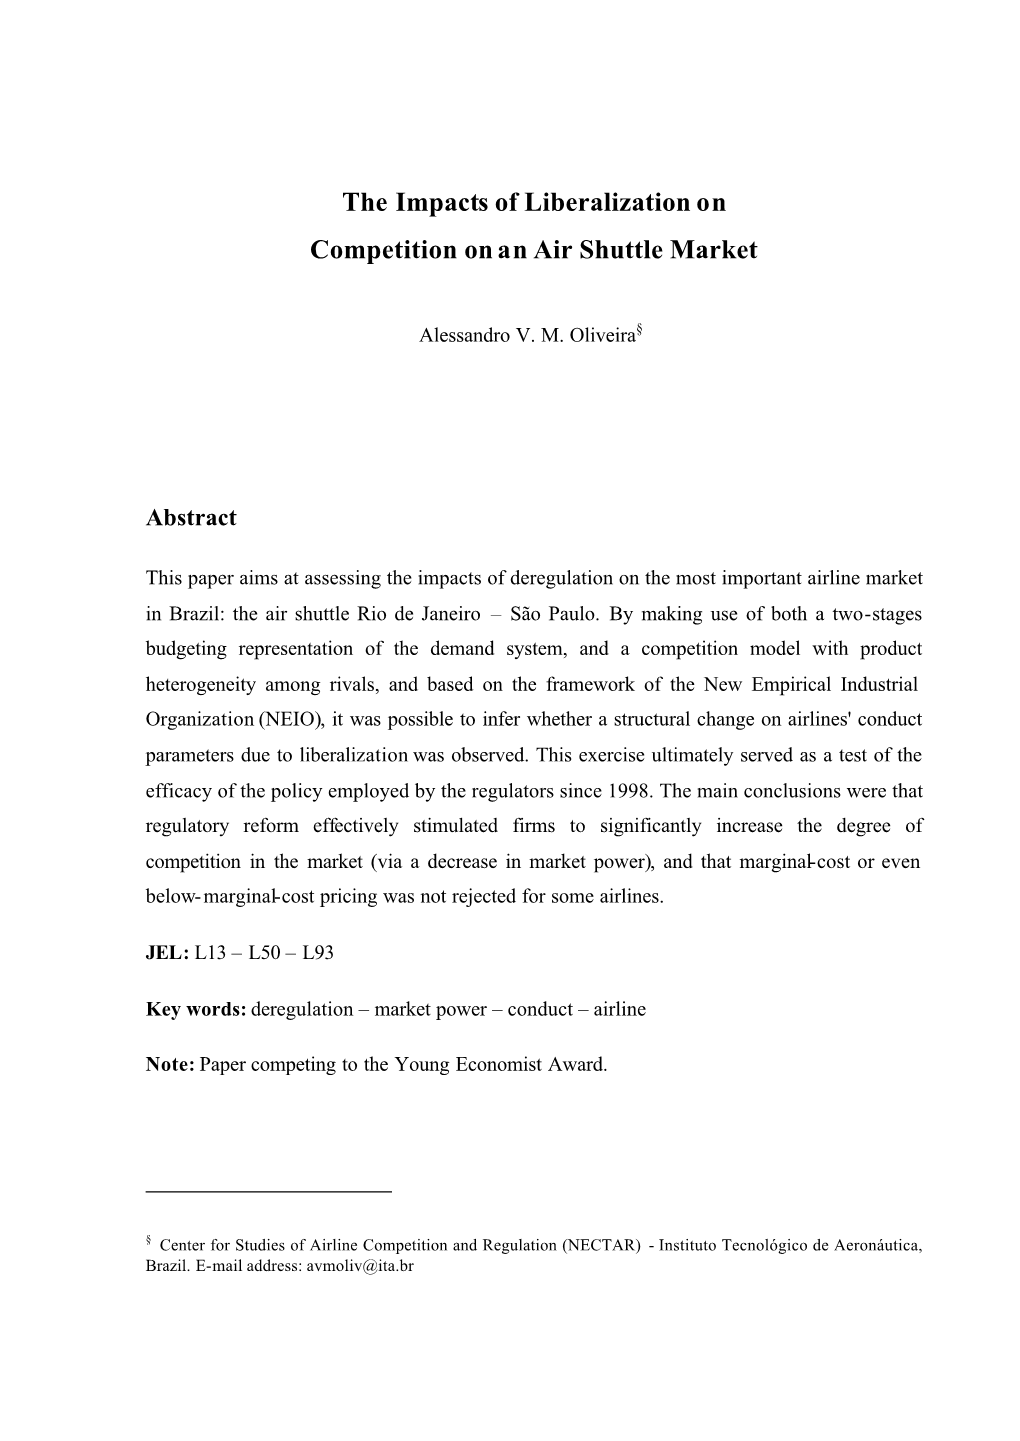 The Impacts of Liberalization on Competition on an Air Shuttle Market